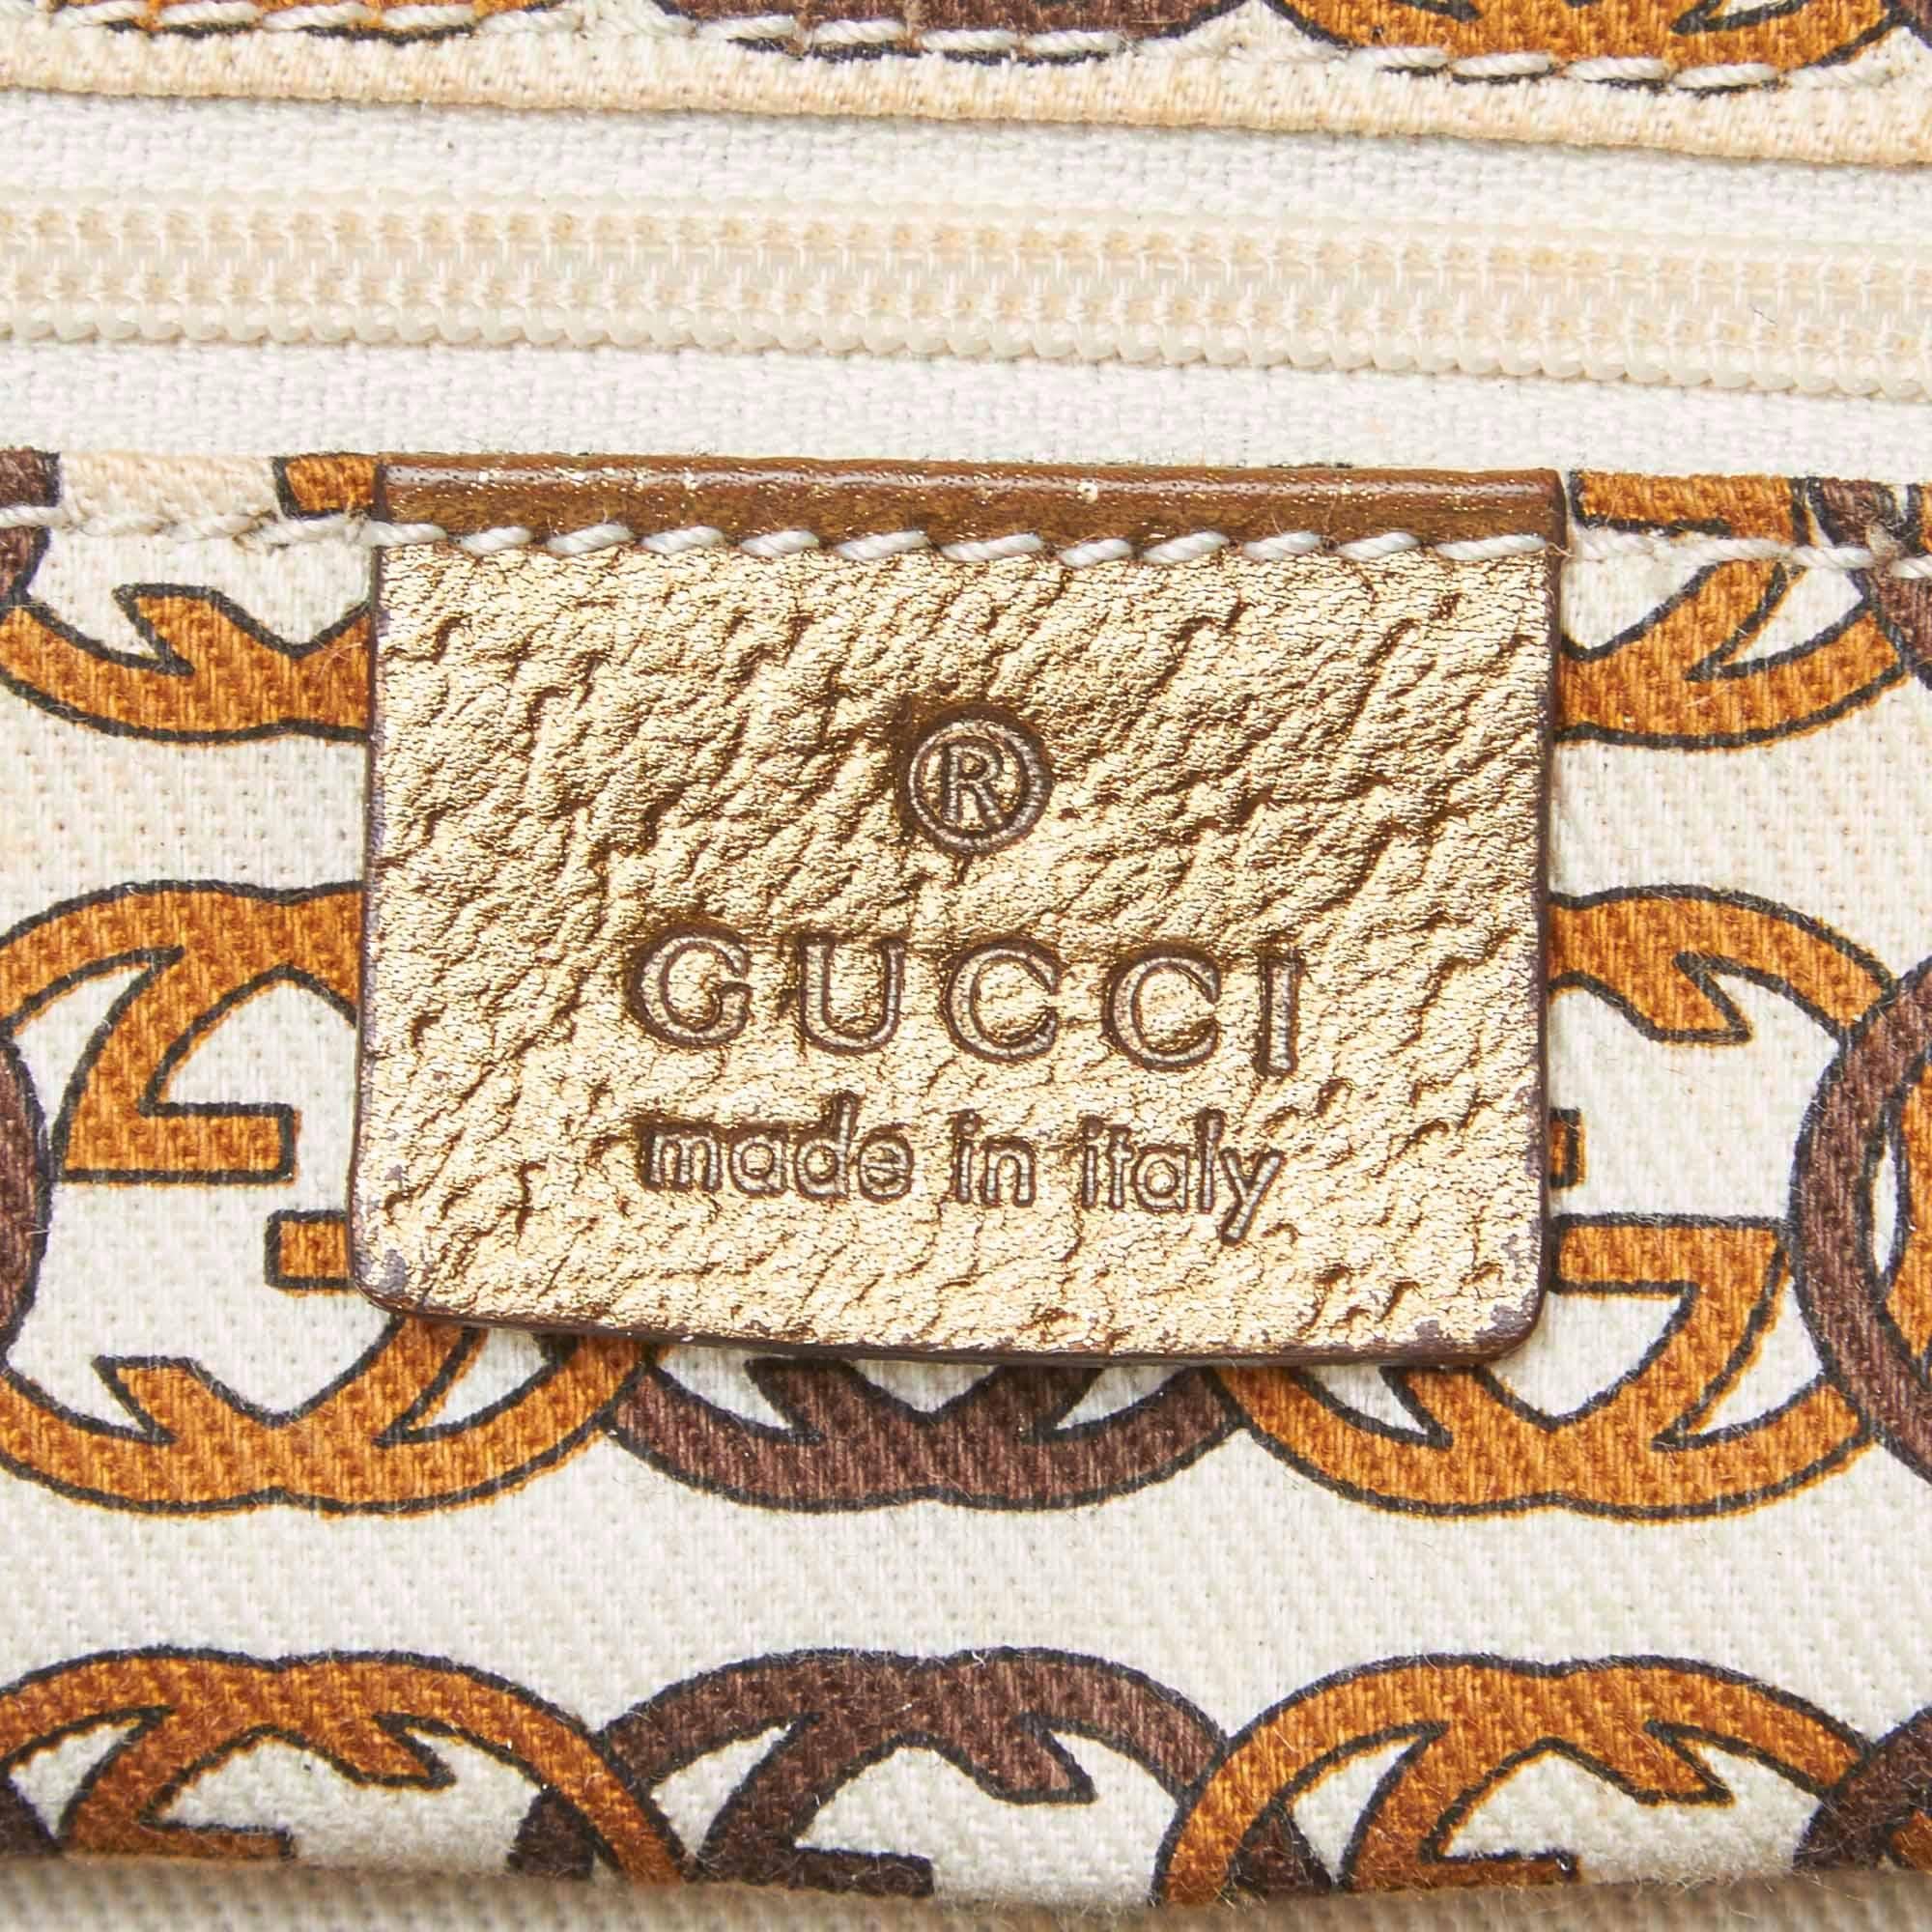 Vintage Authentic Gucci Brown Canvas Fabric GG Princy Shoulder Bag ITALY LARGE  2